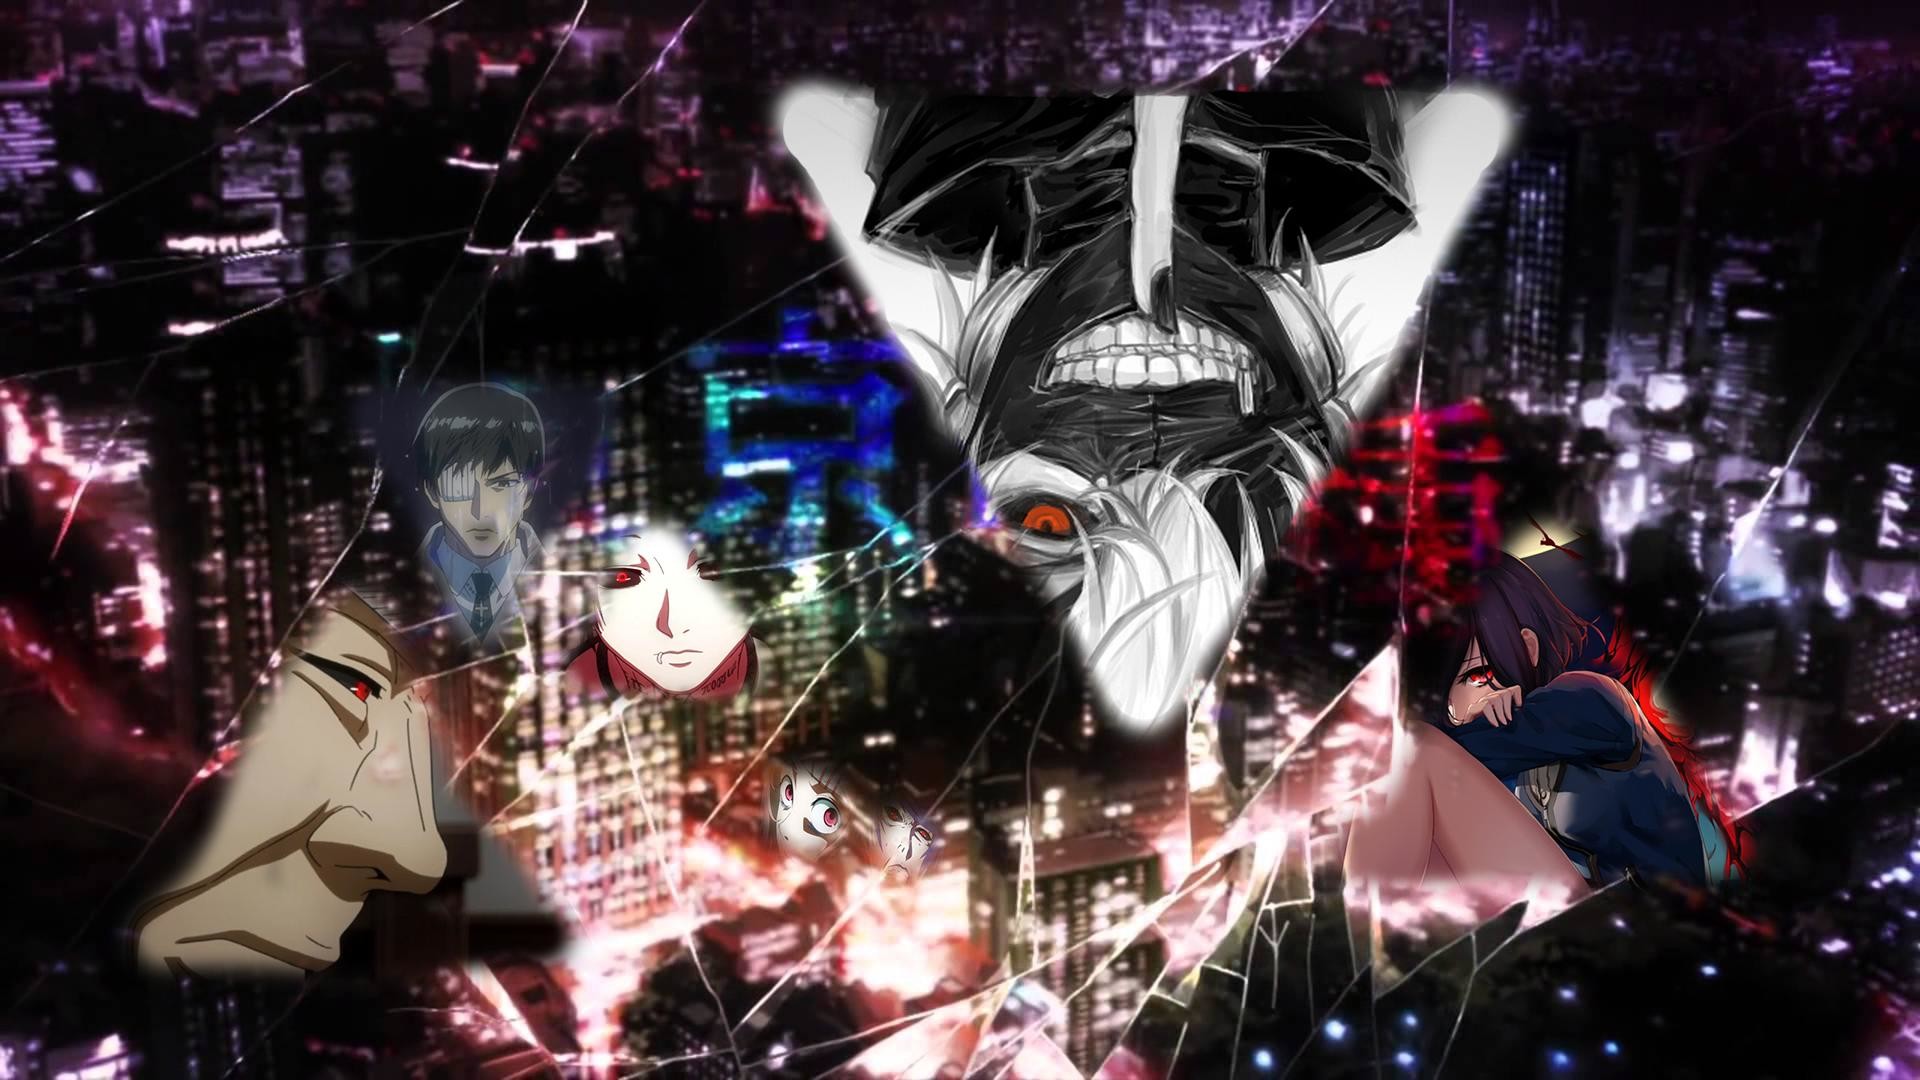 Tokyo Ghoul Wallpaper Live For Android Phone Iphone  FancyOdds